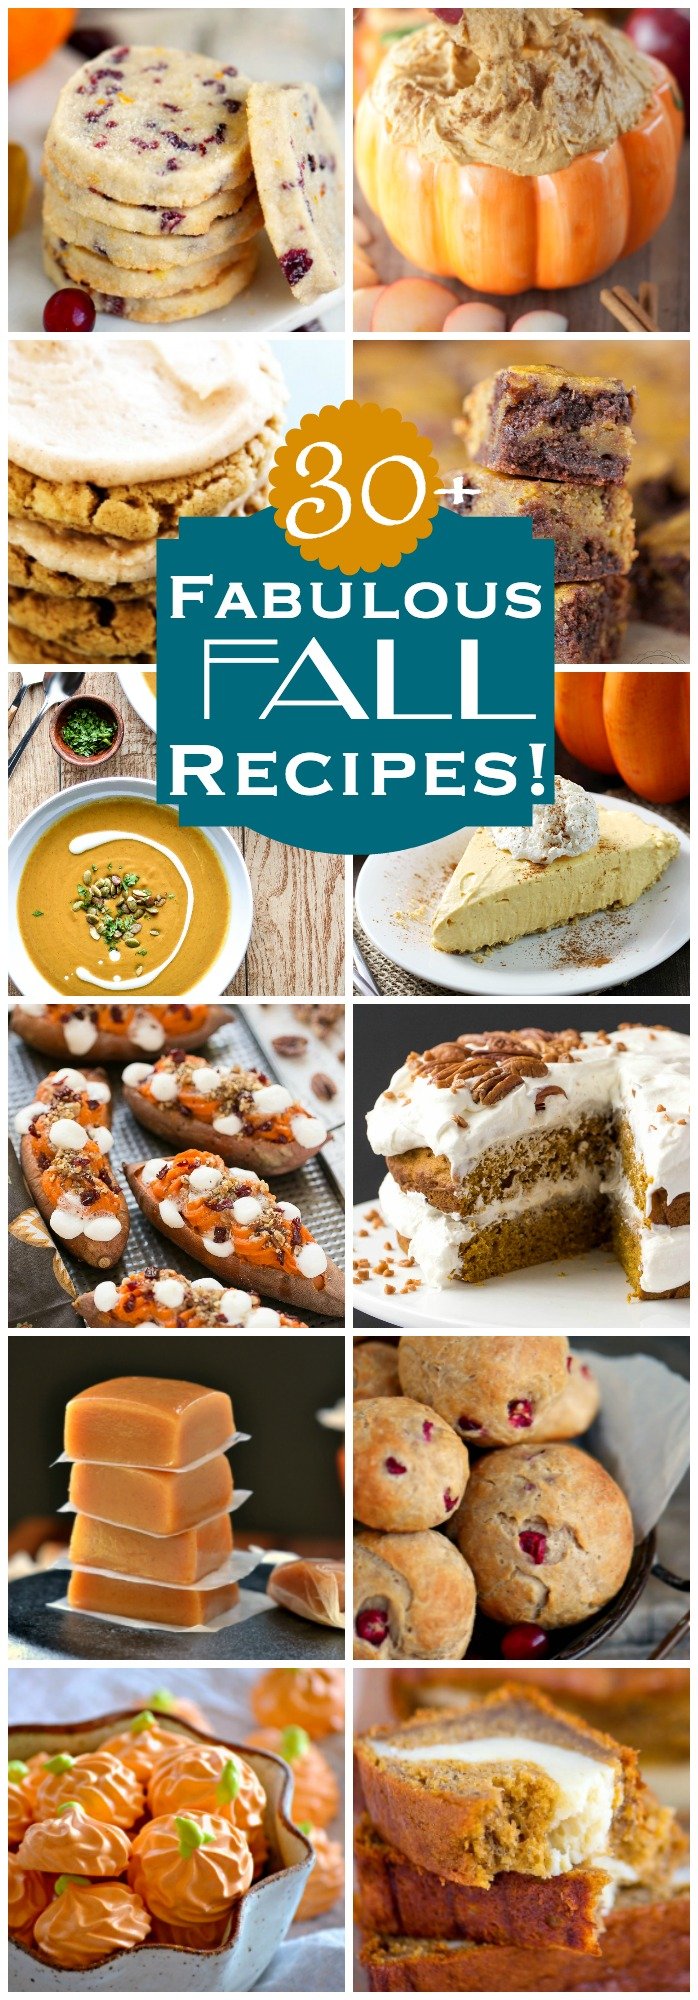 More than 30 FABULOUS FALL RECIPES to keep your tummy happy this season! Desserts, dinner, breakfast and more! Lots of great cranberry, pumpkin, and apple recipes right here for you to enjoy! // Mom On Timeout